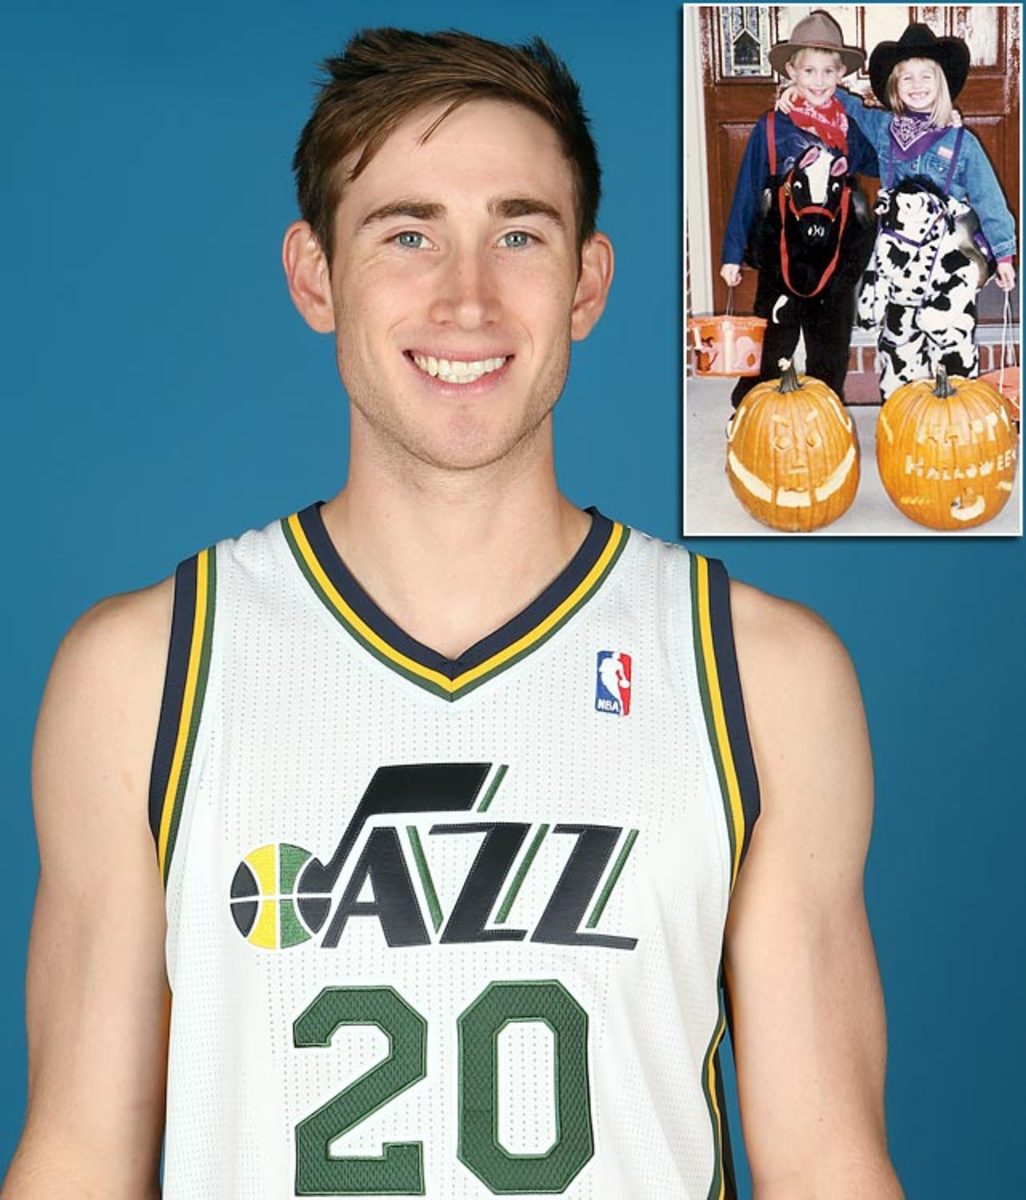 Gordon Hayward-inspired Halloween costume is painfully clever